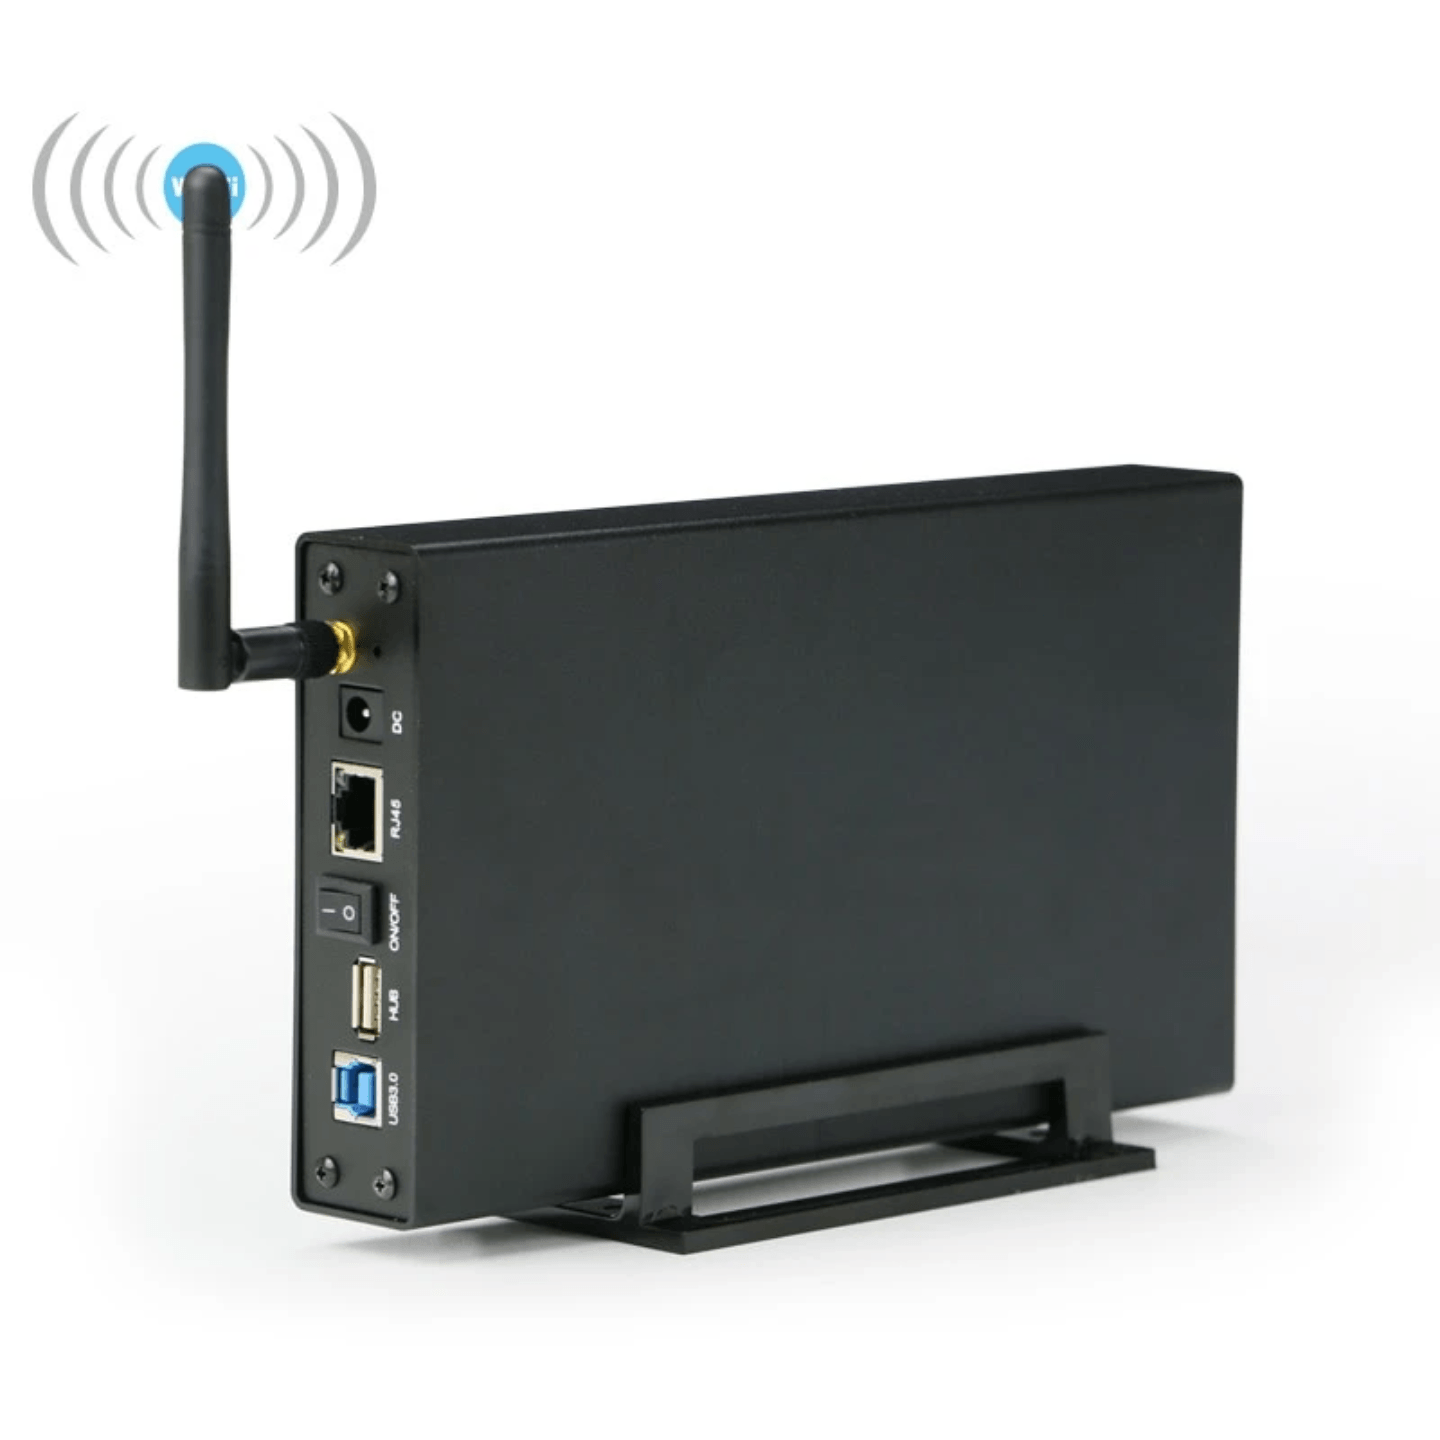 Personal NAS with WiFi Hotspot